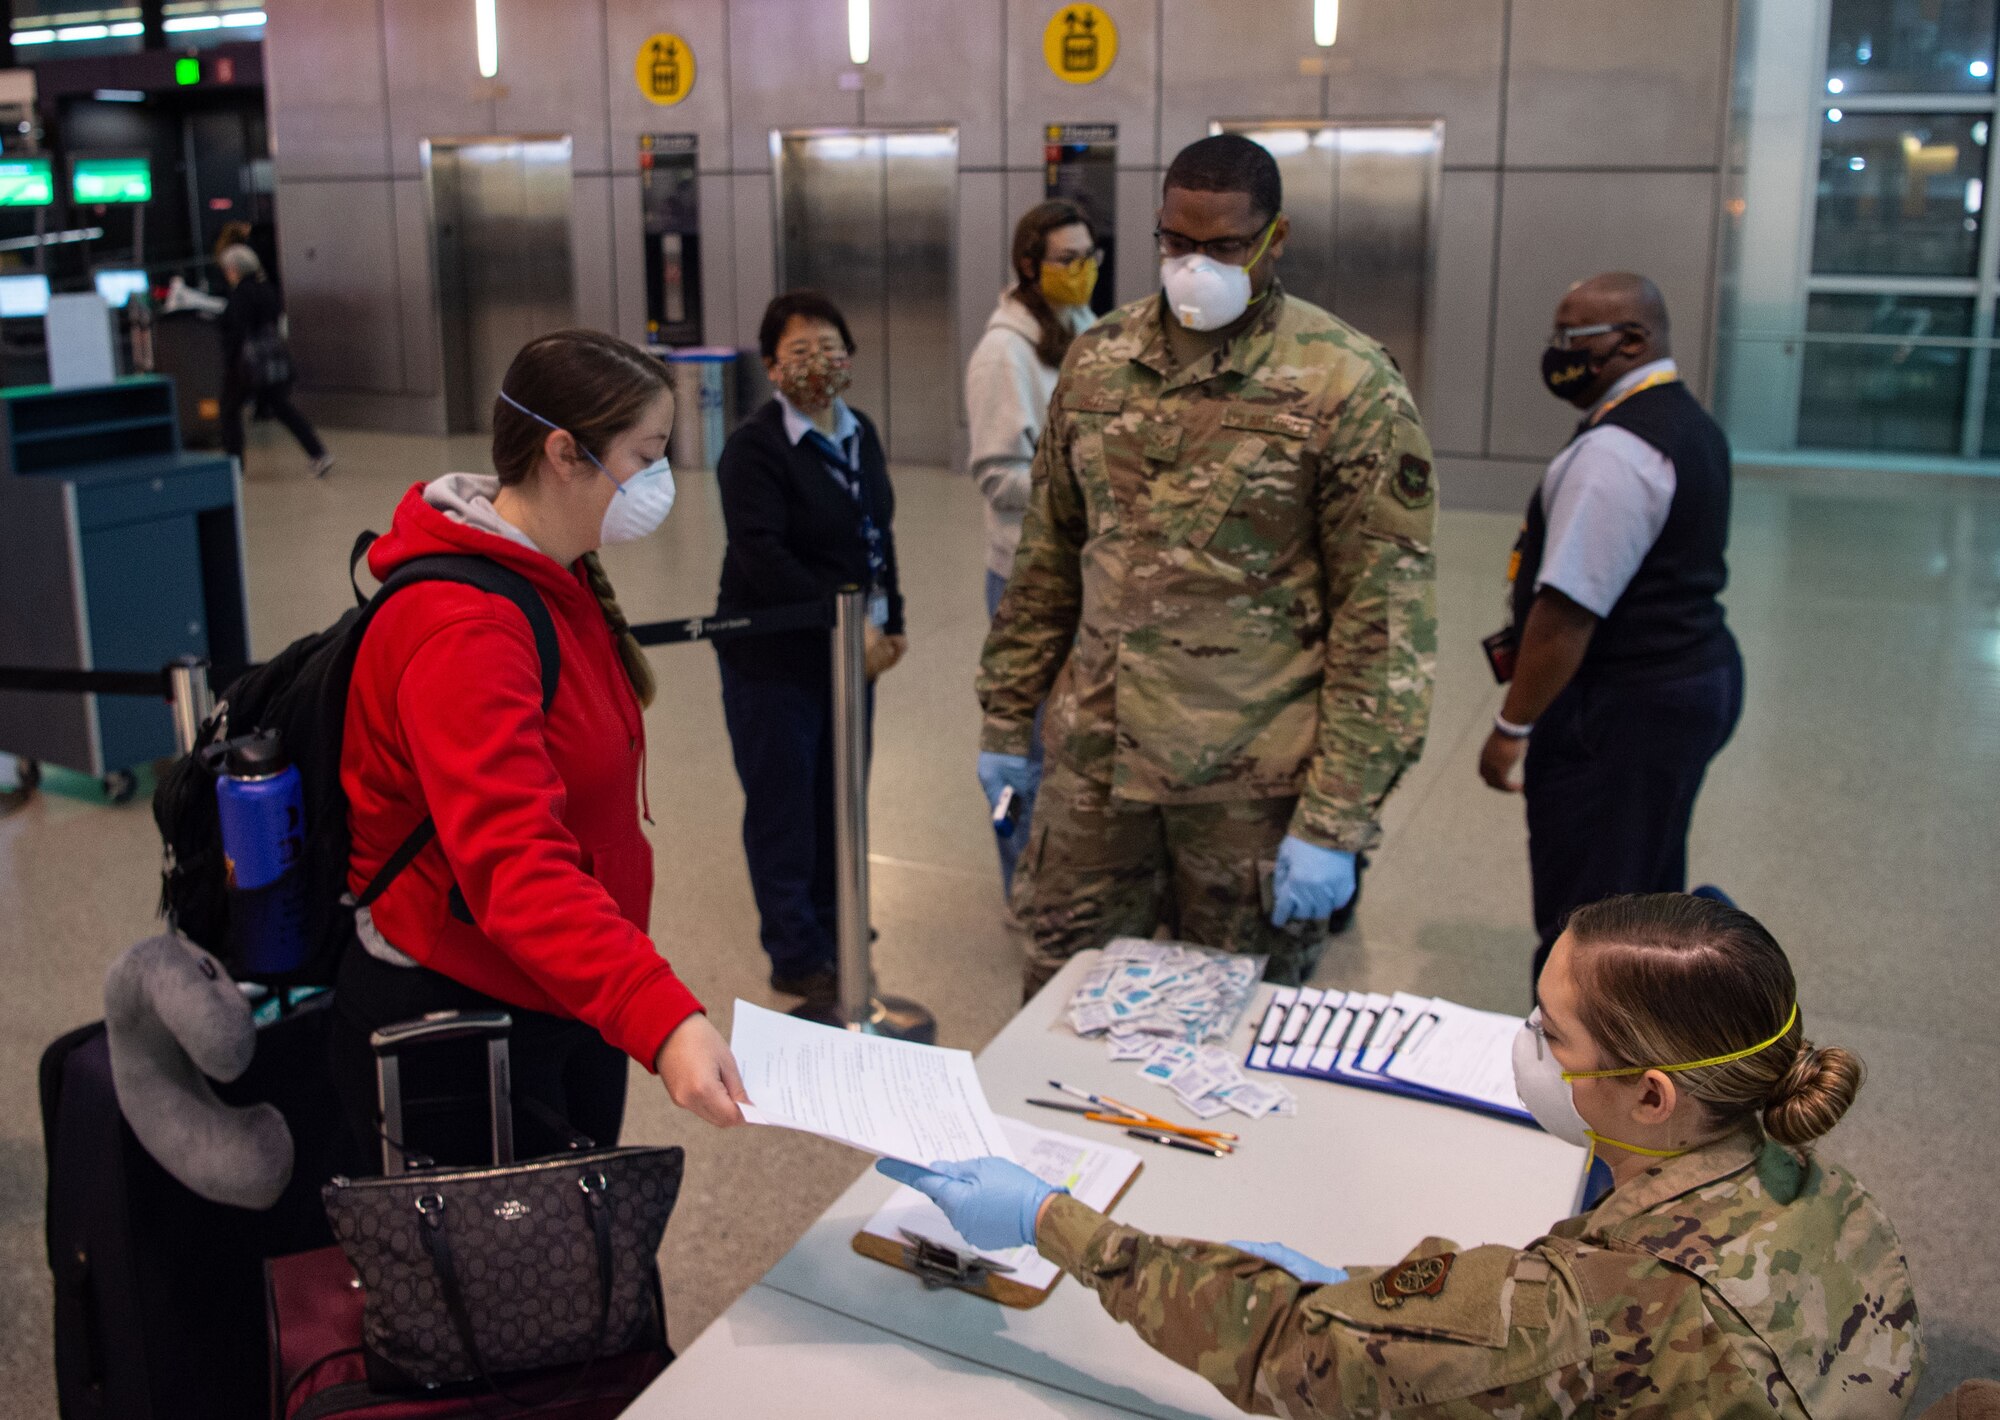 A passenger traveling to Asia, left, hands a medical questionnaire to Airman 1st Class Nicole Mourik, 62nd Aerial Port Squadron passenger service specialist, at the Seattle-Tacoma International Airport in Seattle, Wash., April 30, 2020. In order to travel while still preventing the spread of COVID-19, passengers must answer questions about their current health, where they have traveled recently, and whether they work in a medical facility. (U.S. Air Force photo by Senior Airman Tryphena Mayhugh)